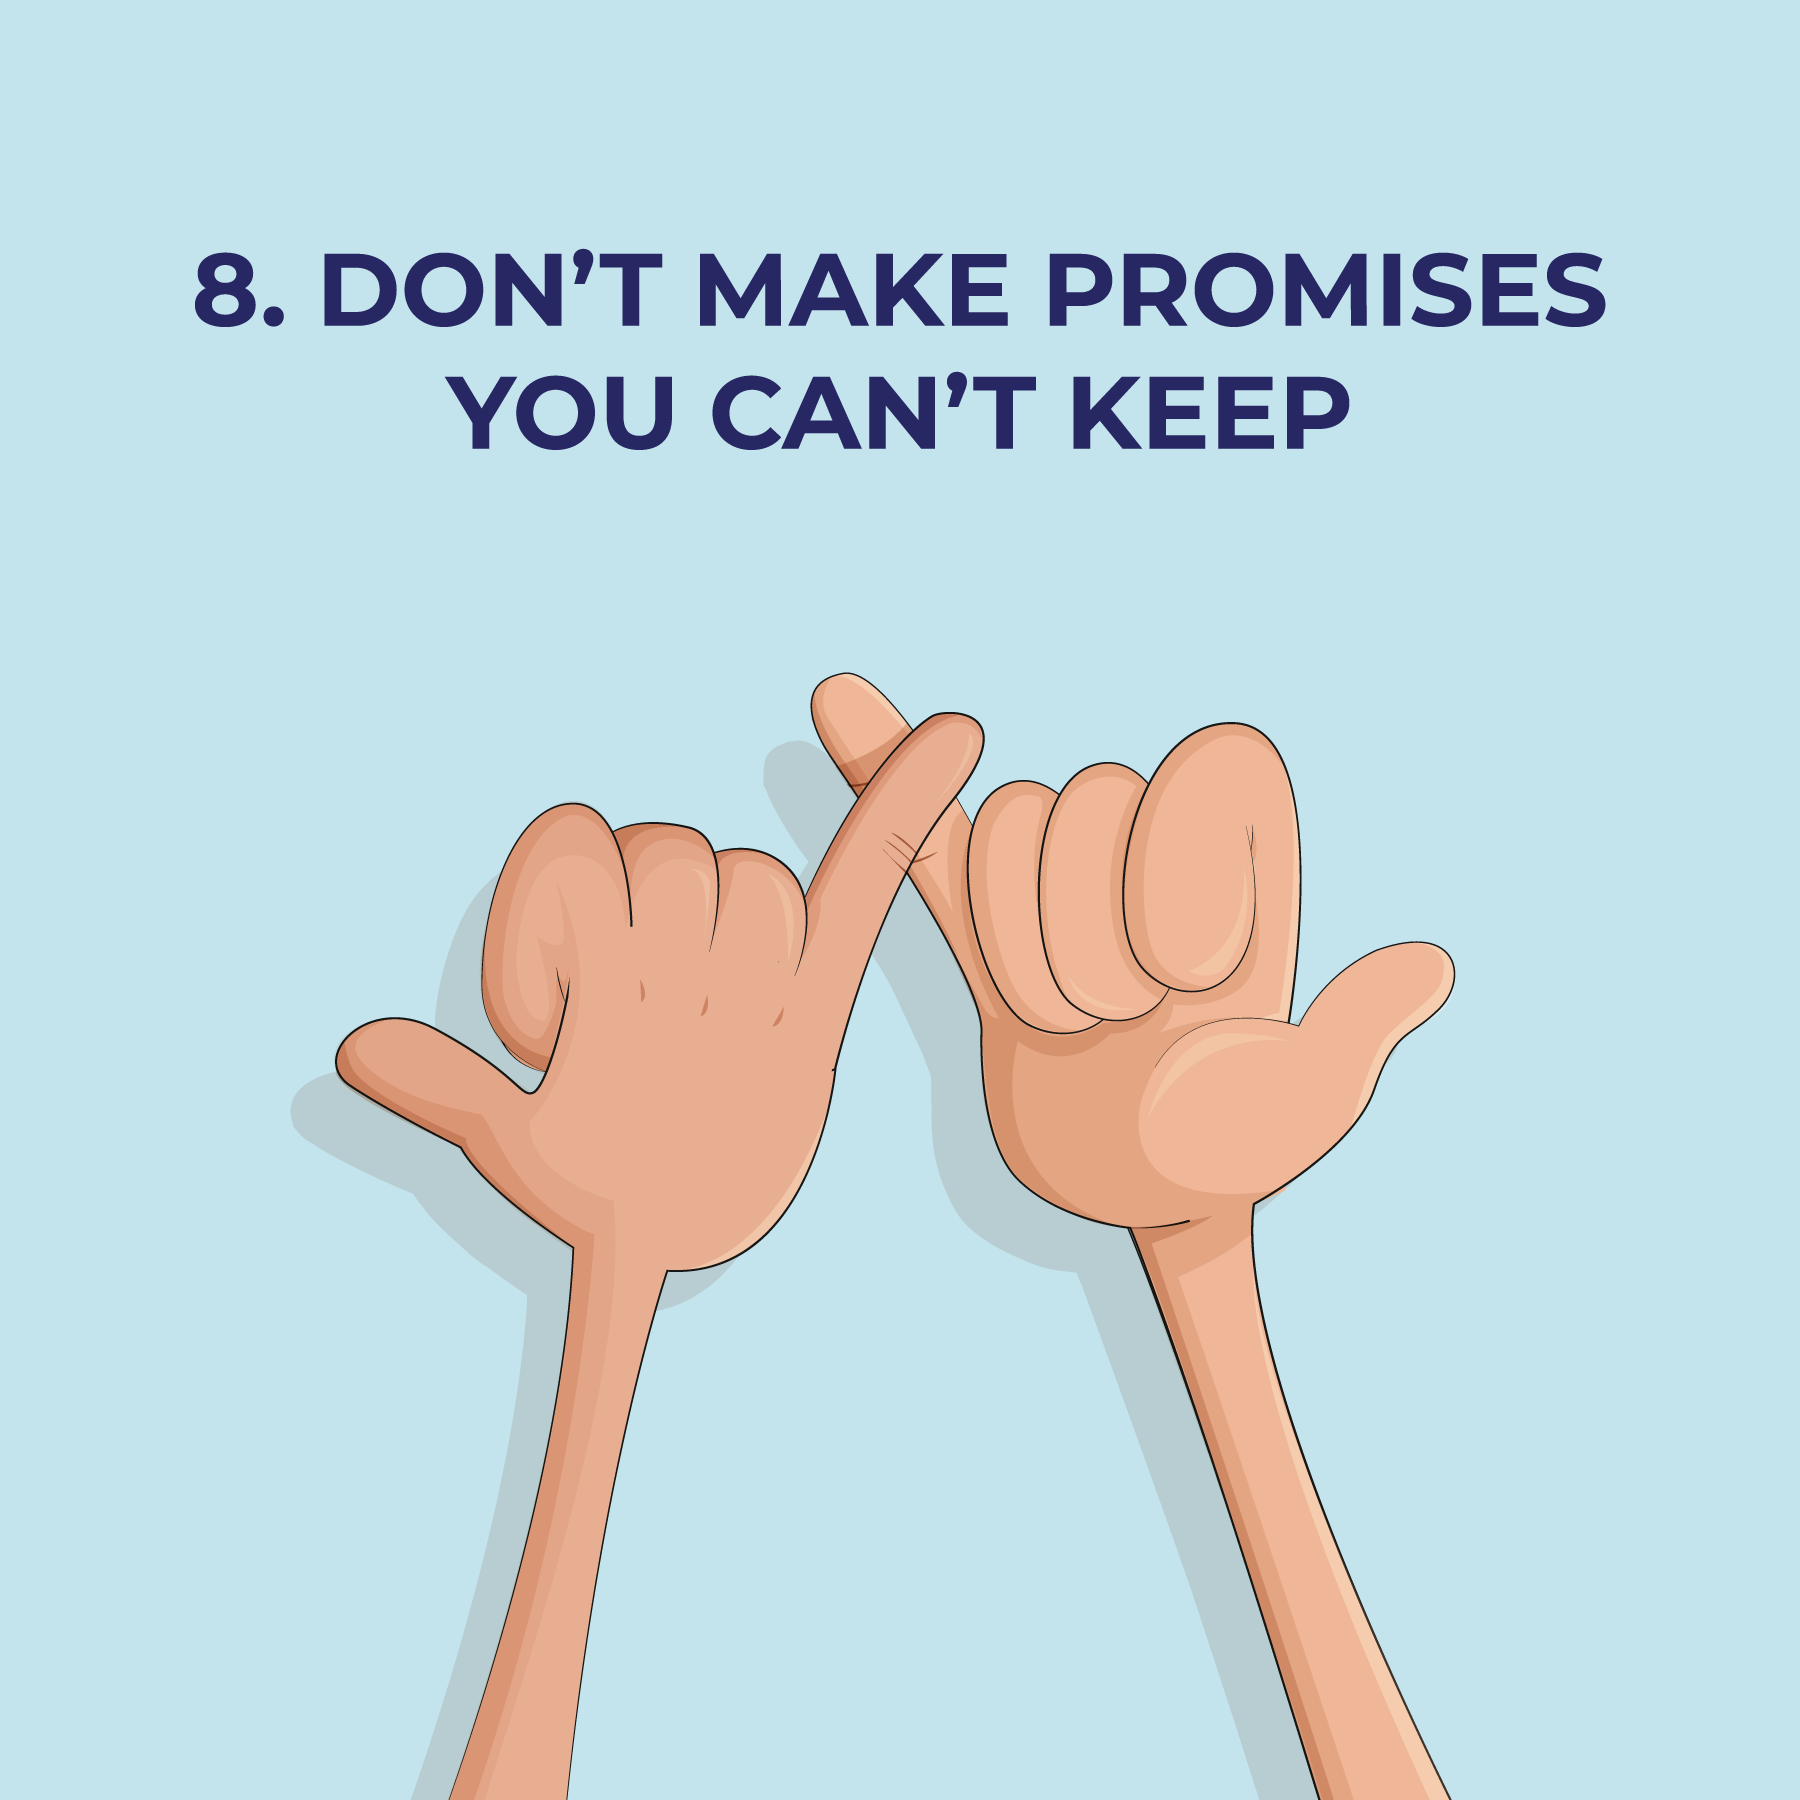 Don't make promises you can't keep